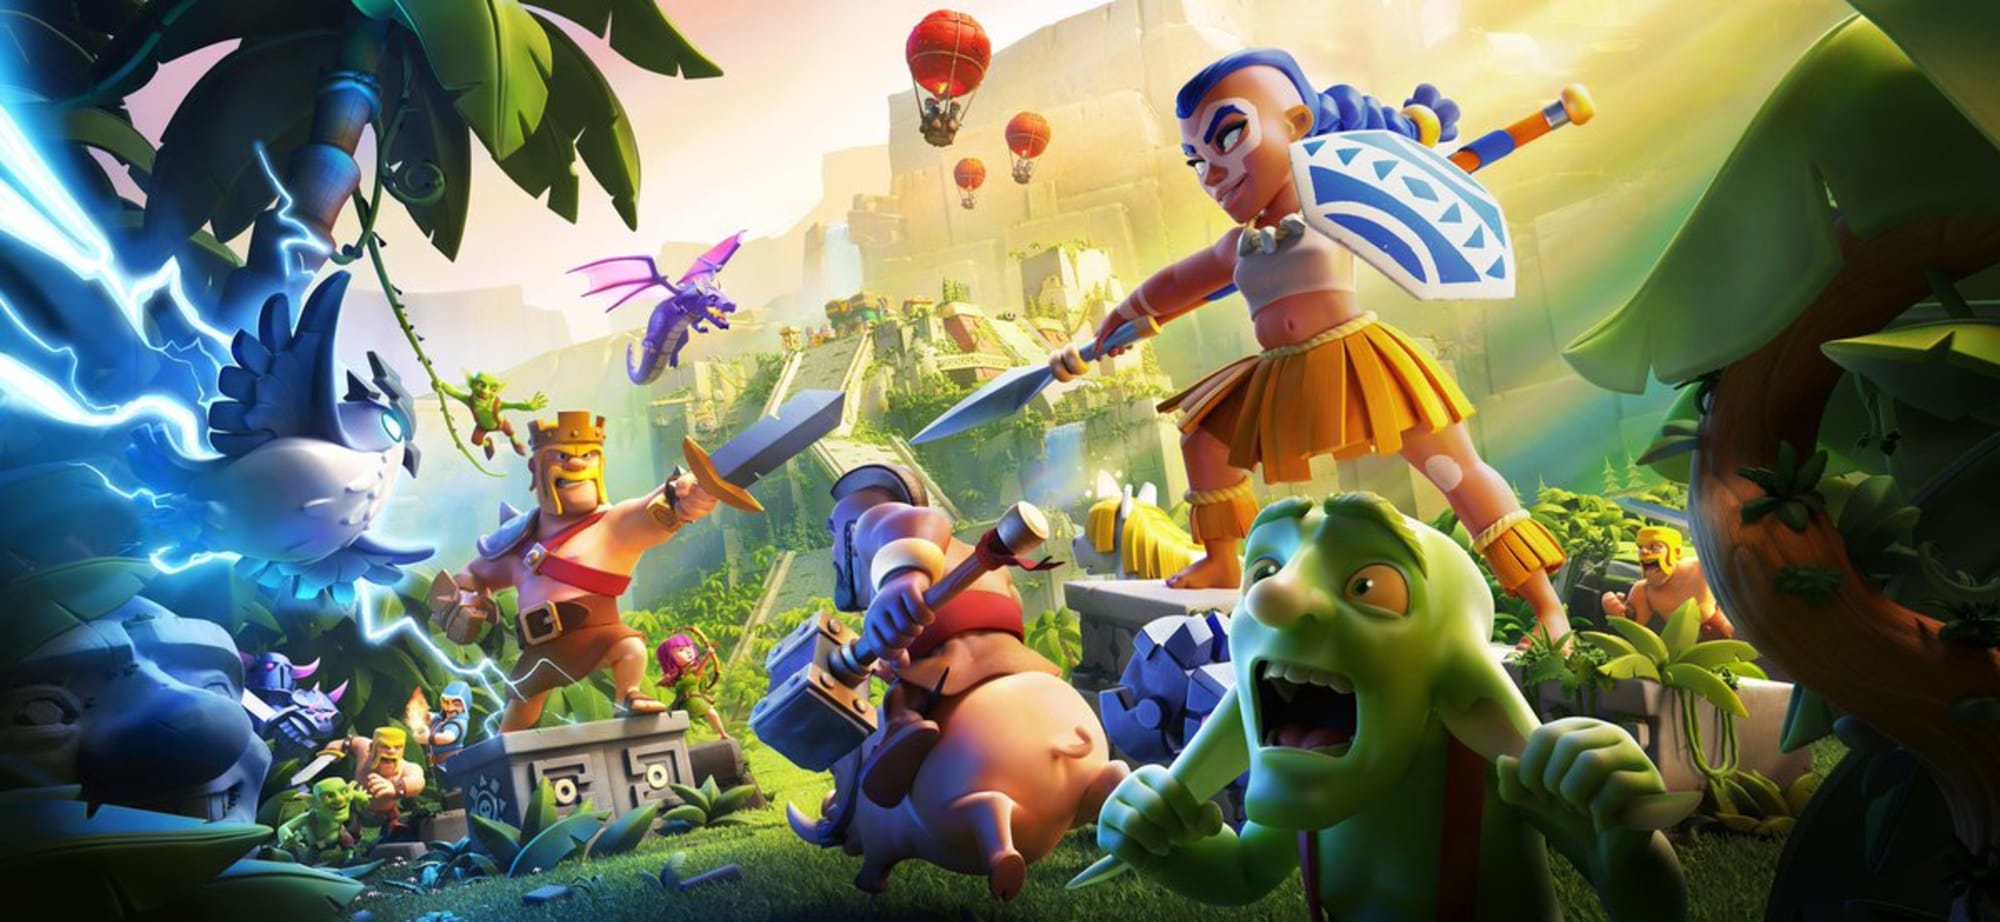 Clash of Clans Spring 2022 update: New teaser hinting at a Super Builder?